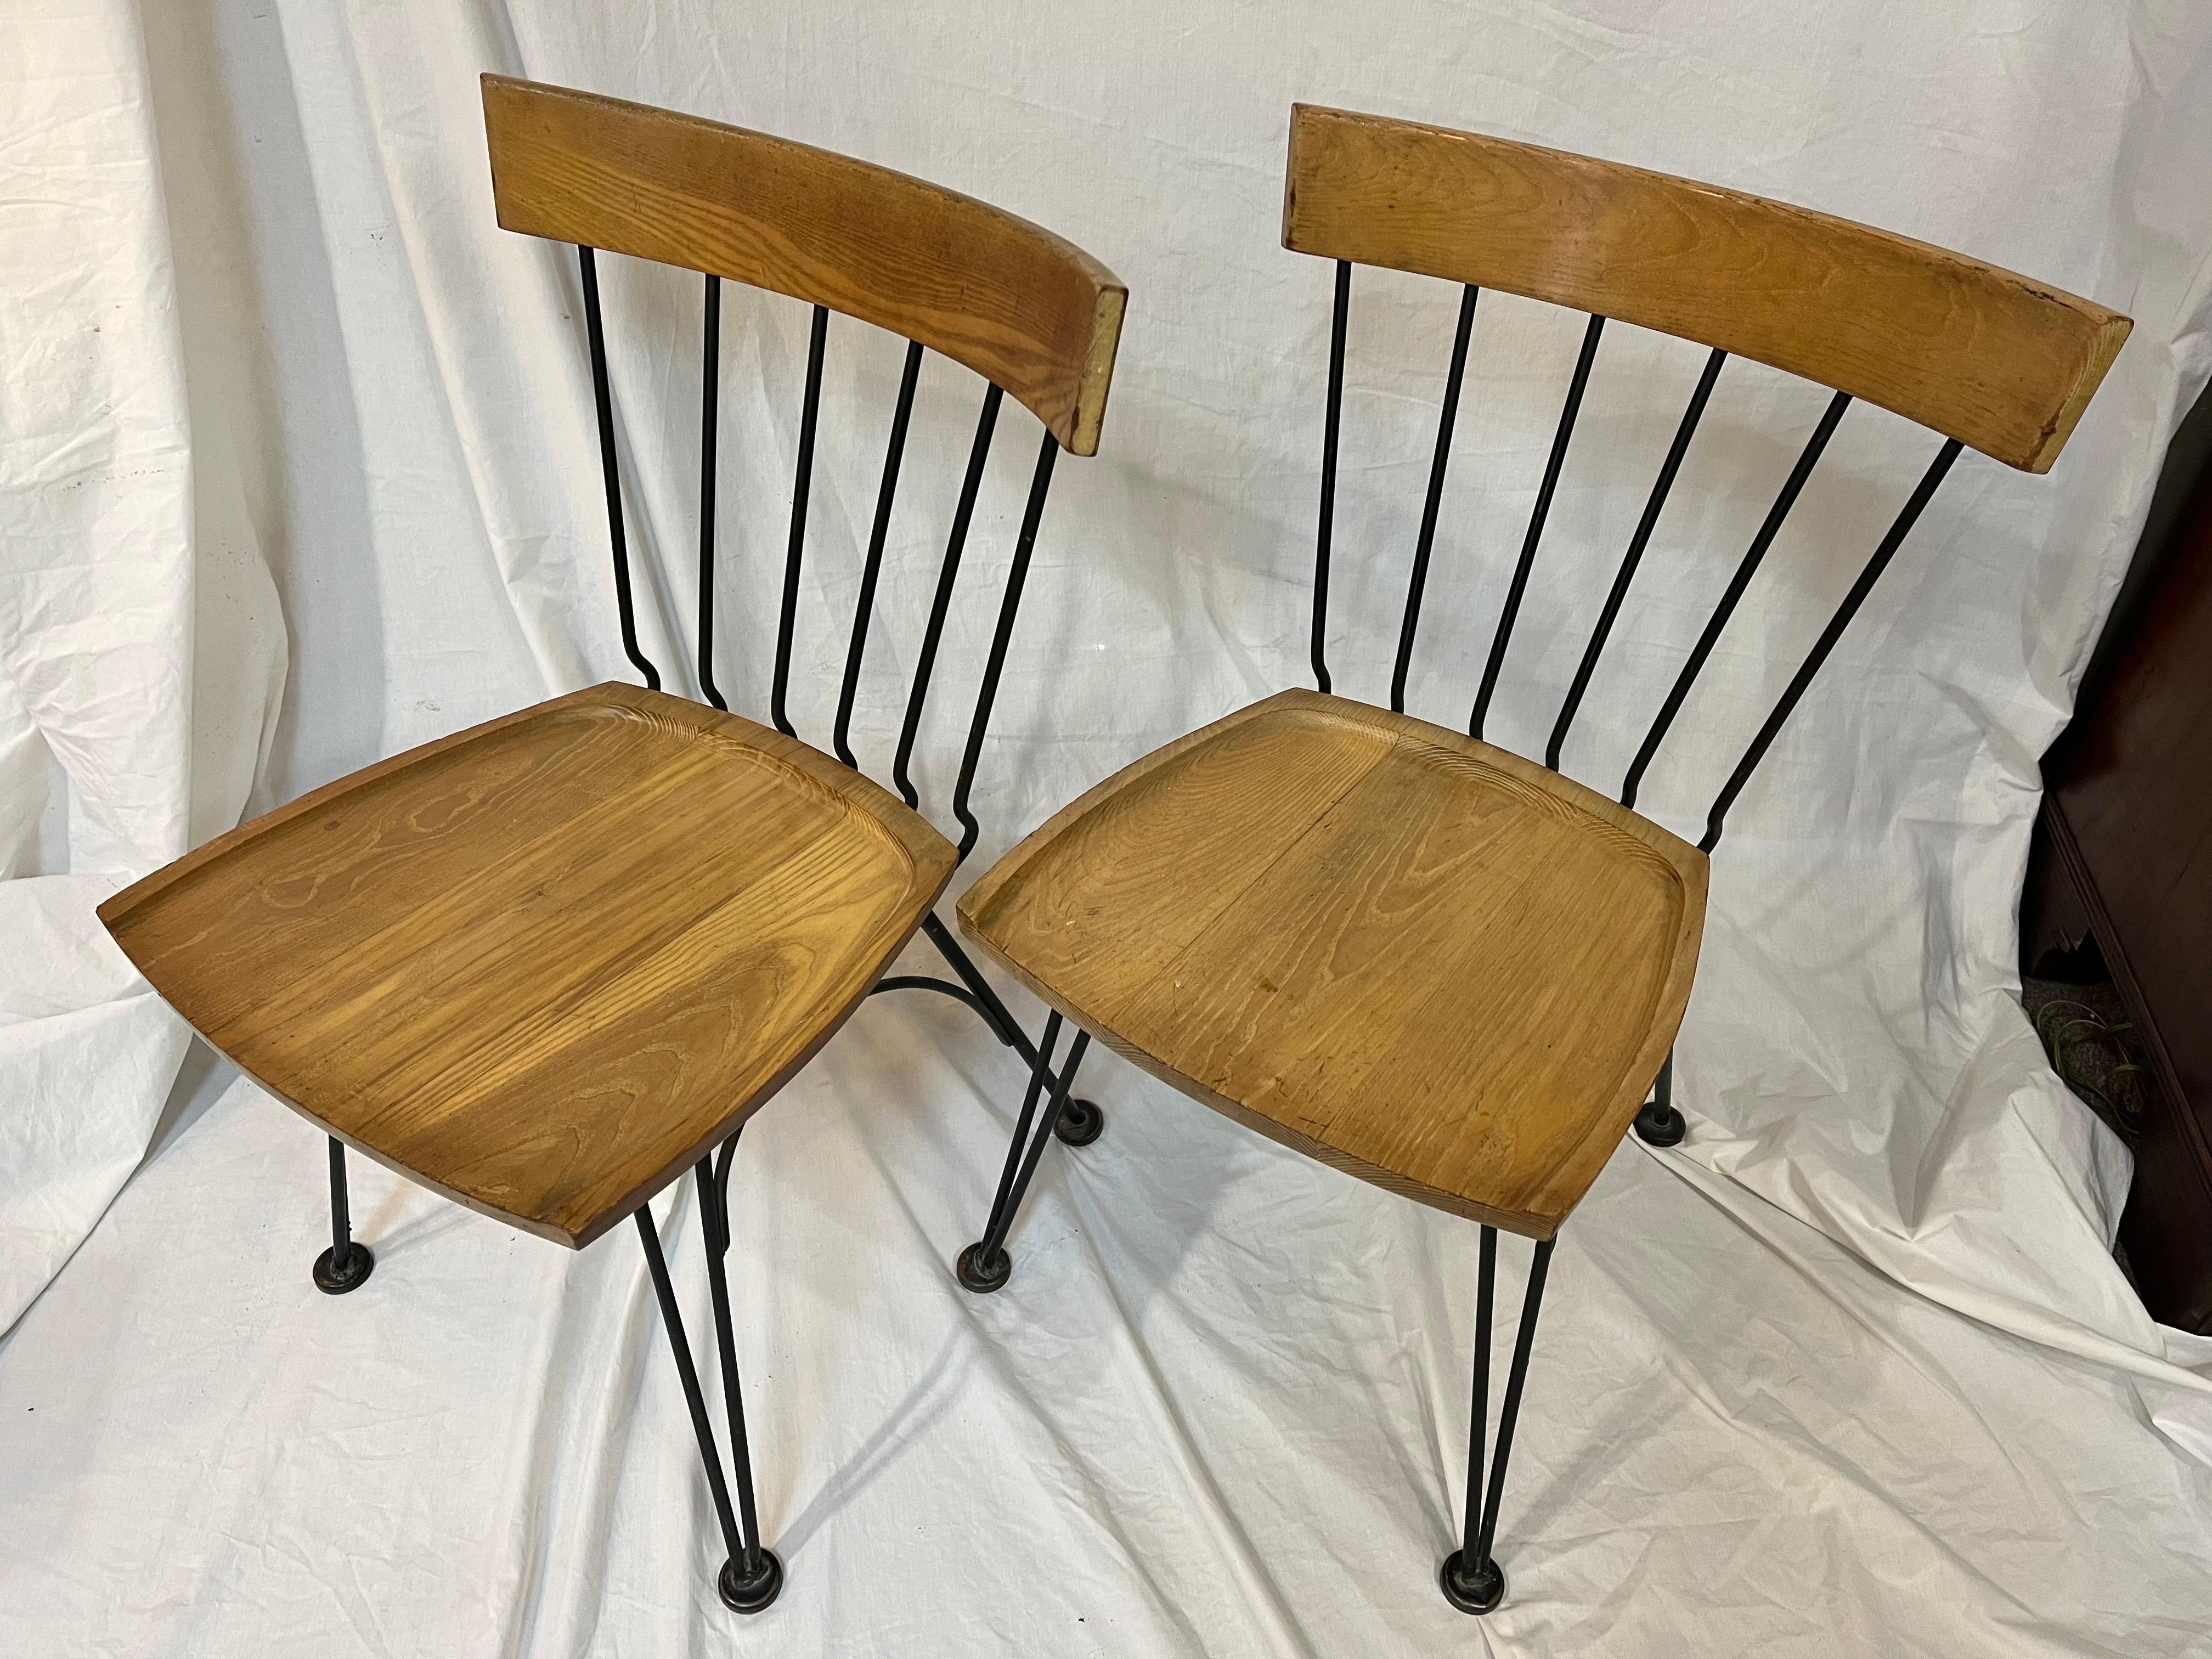 A pair of Mid-Century Modern, circa early 1950s Allegro chairs by Lee Woodard. This pair of sturdy wood and iron chairs is supremely comfortable and exhibits all of the hallmarks of great mid century design. For a bit of history on Lee Woodard and